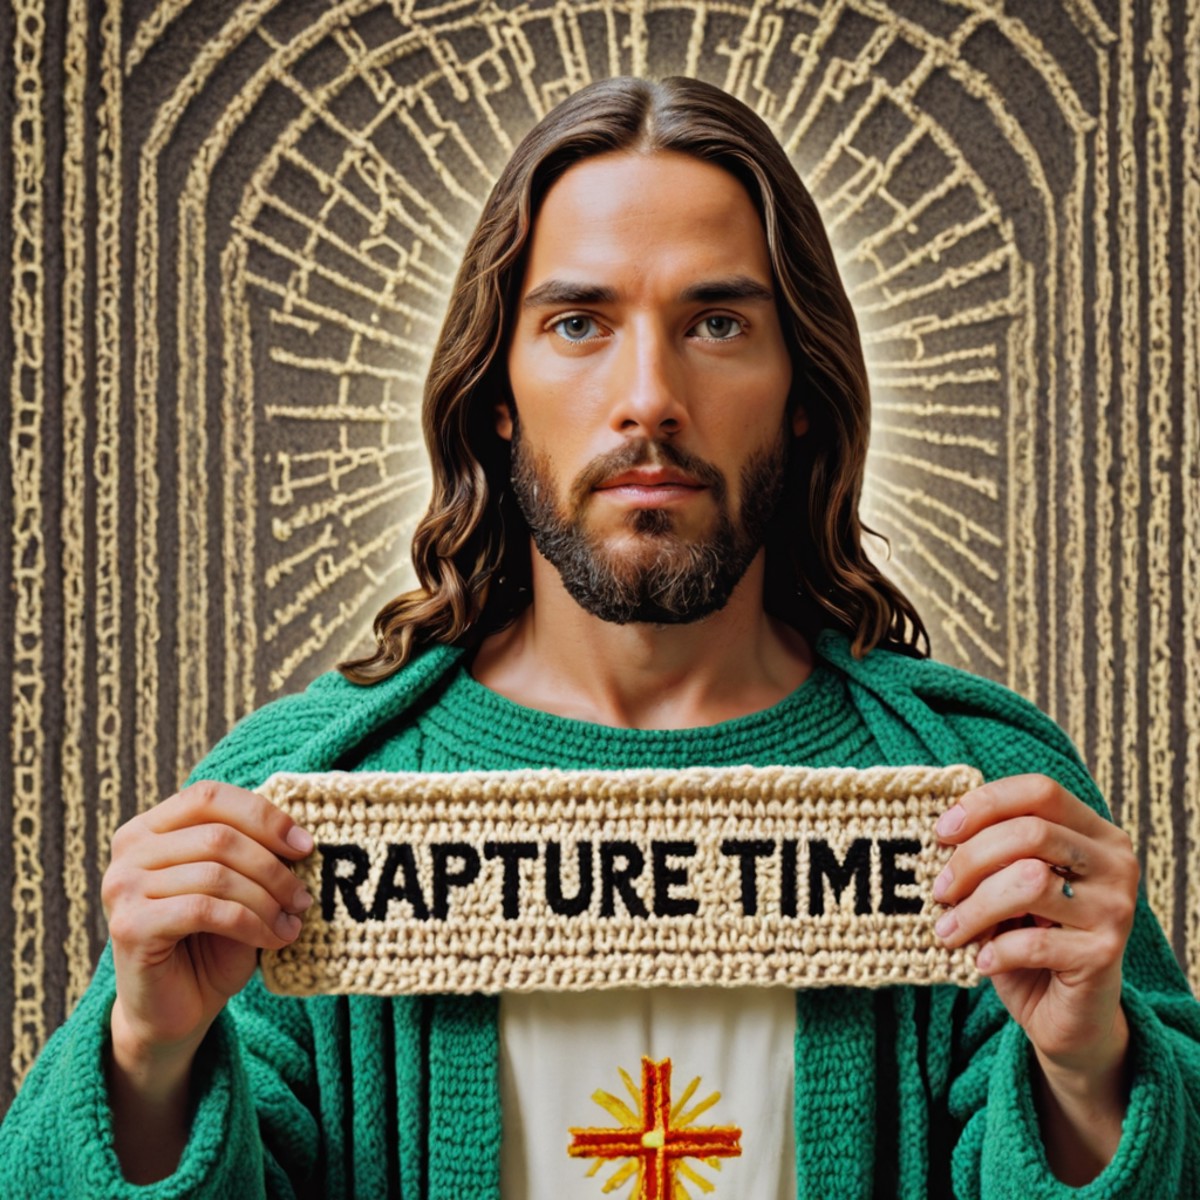 Photo of Jesus with a sign that says "rapture time" in matrix code background <lora:CROCHETED:0.7>CROCHETED